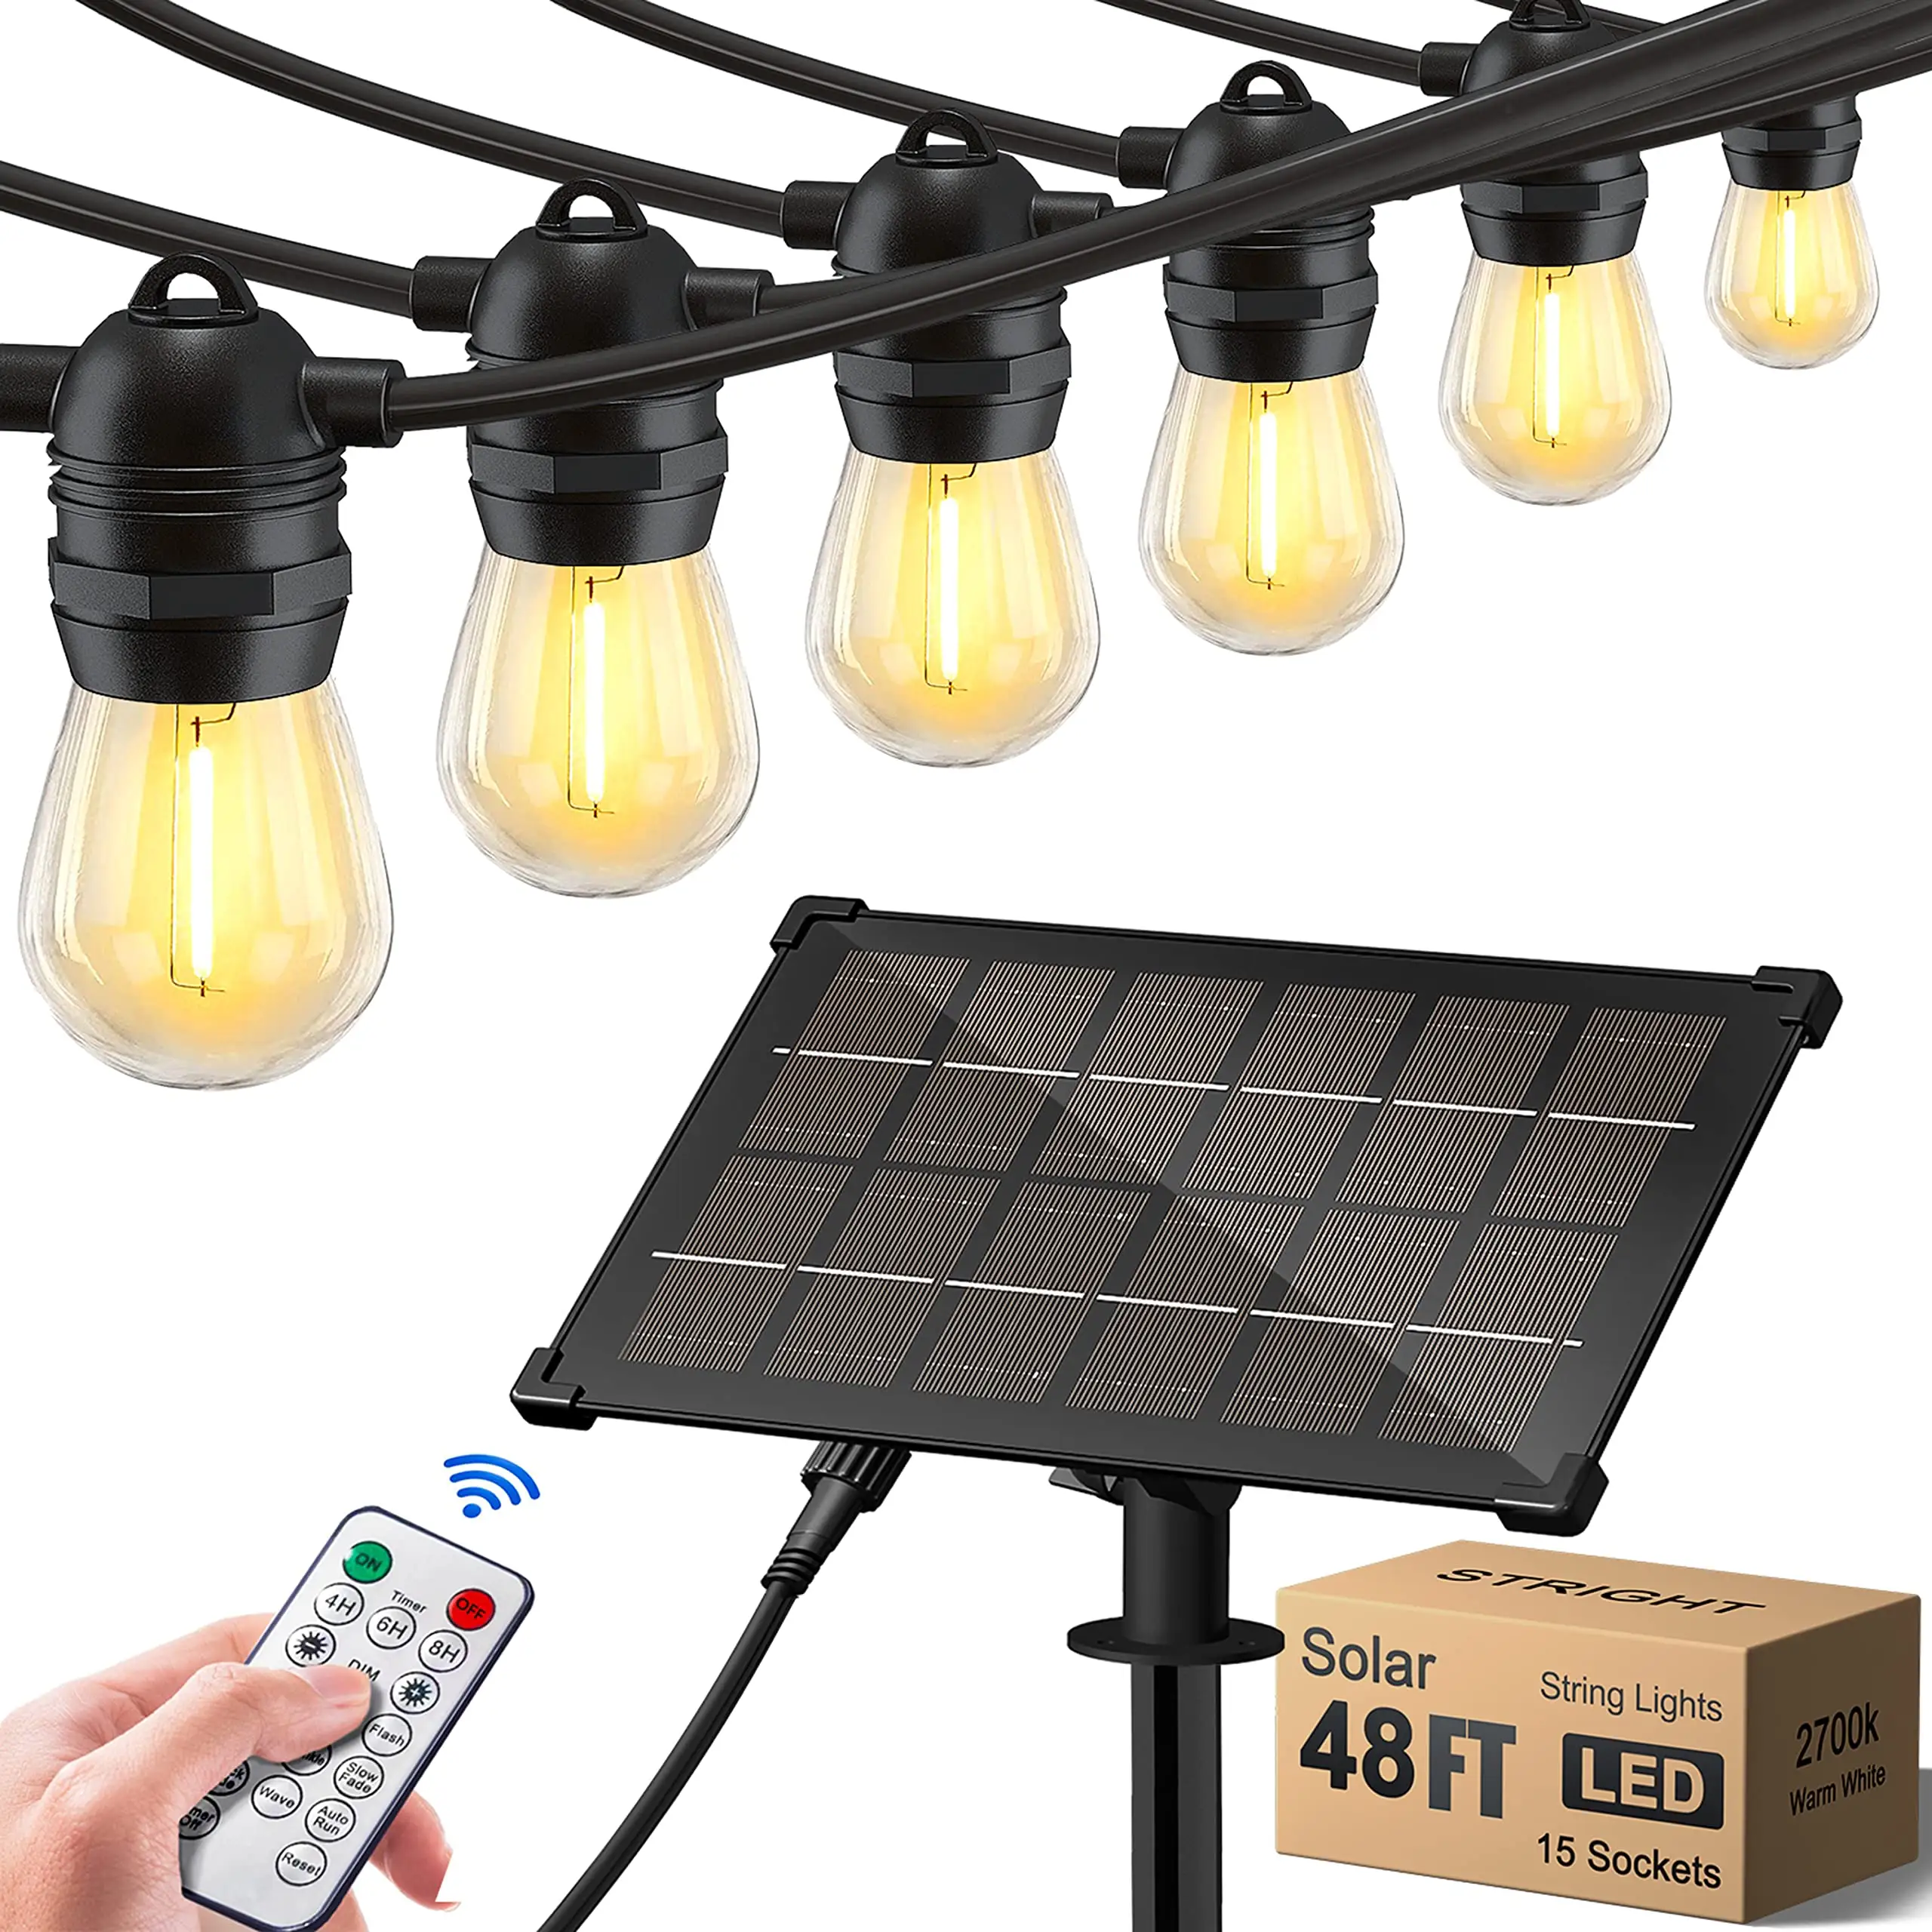 LED string lights with remote